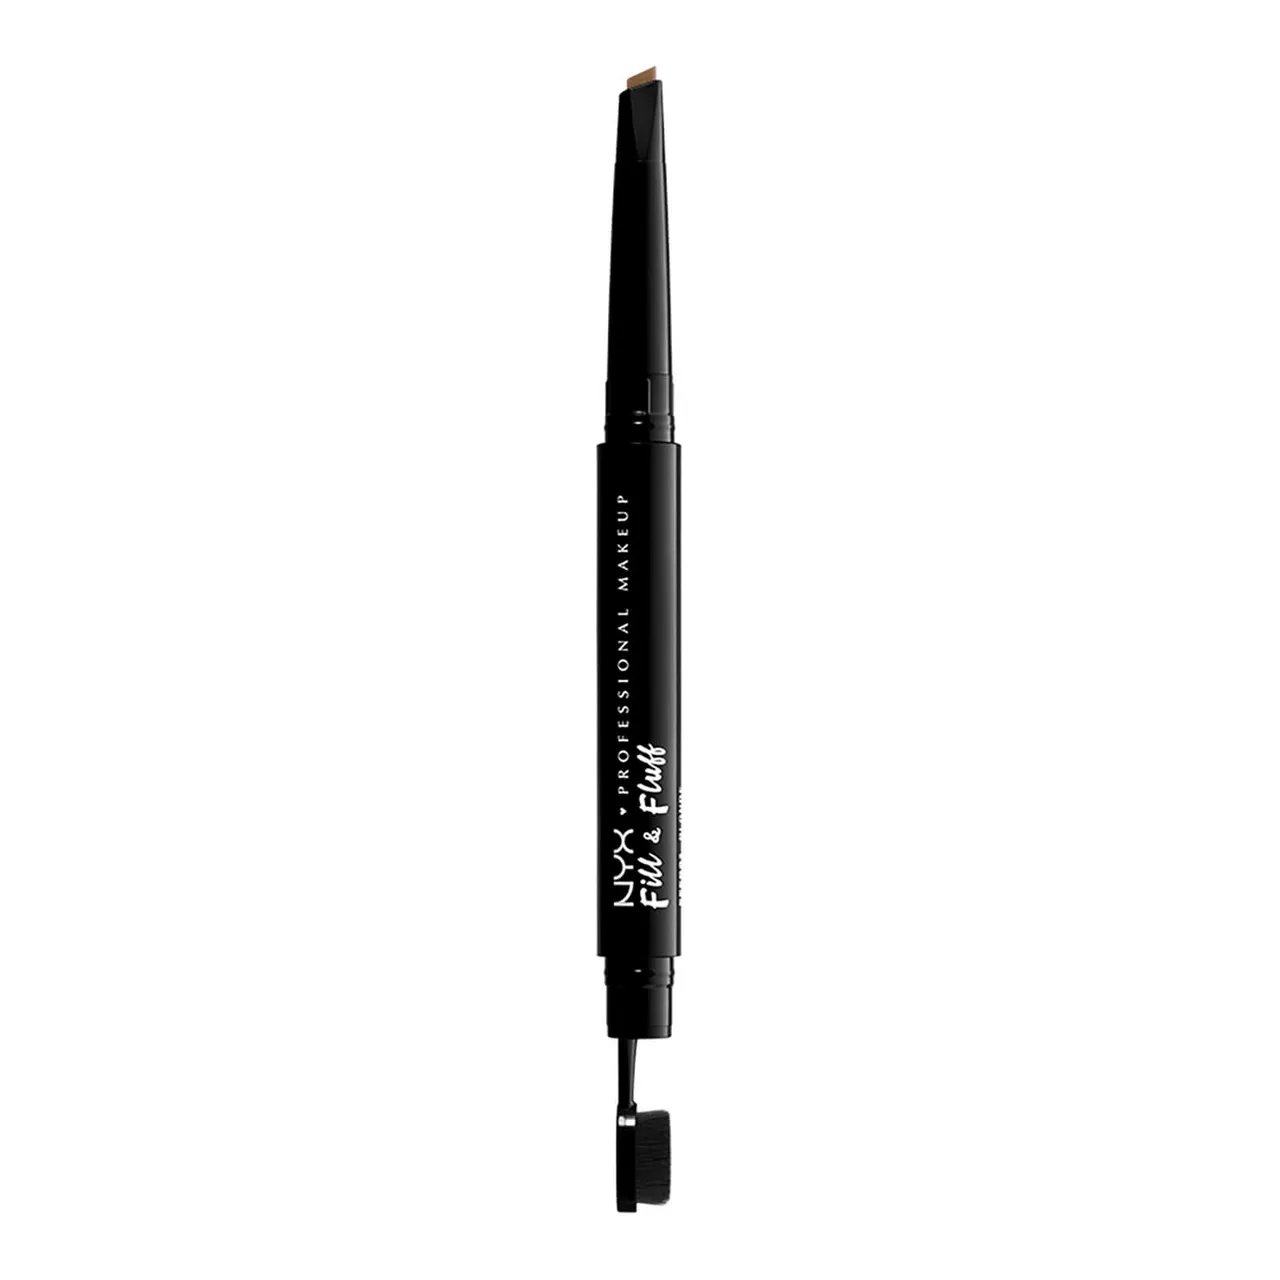 NYX Professional Makeup Fill and Fluff Eyebrow Pomade Pencil 0.2g (Various Shades) - Taupe